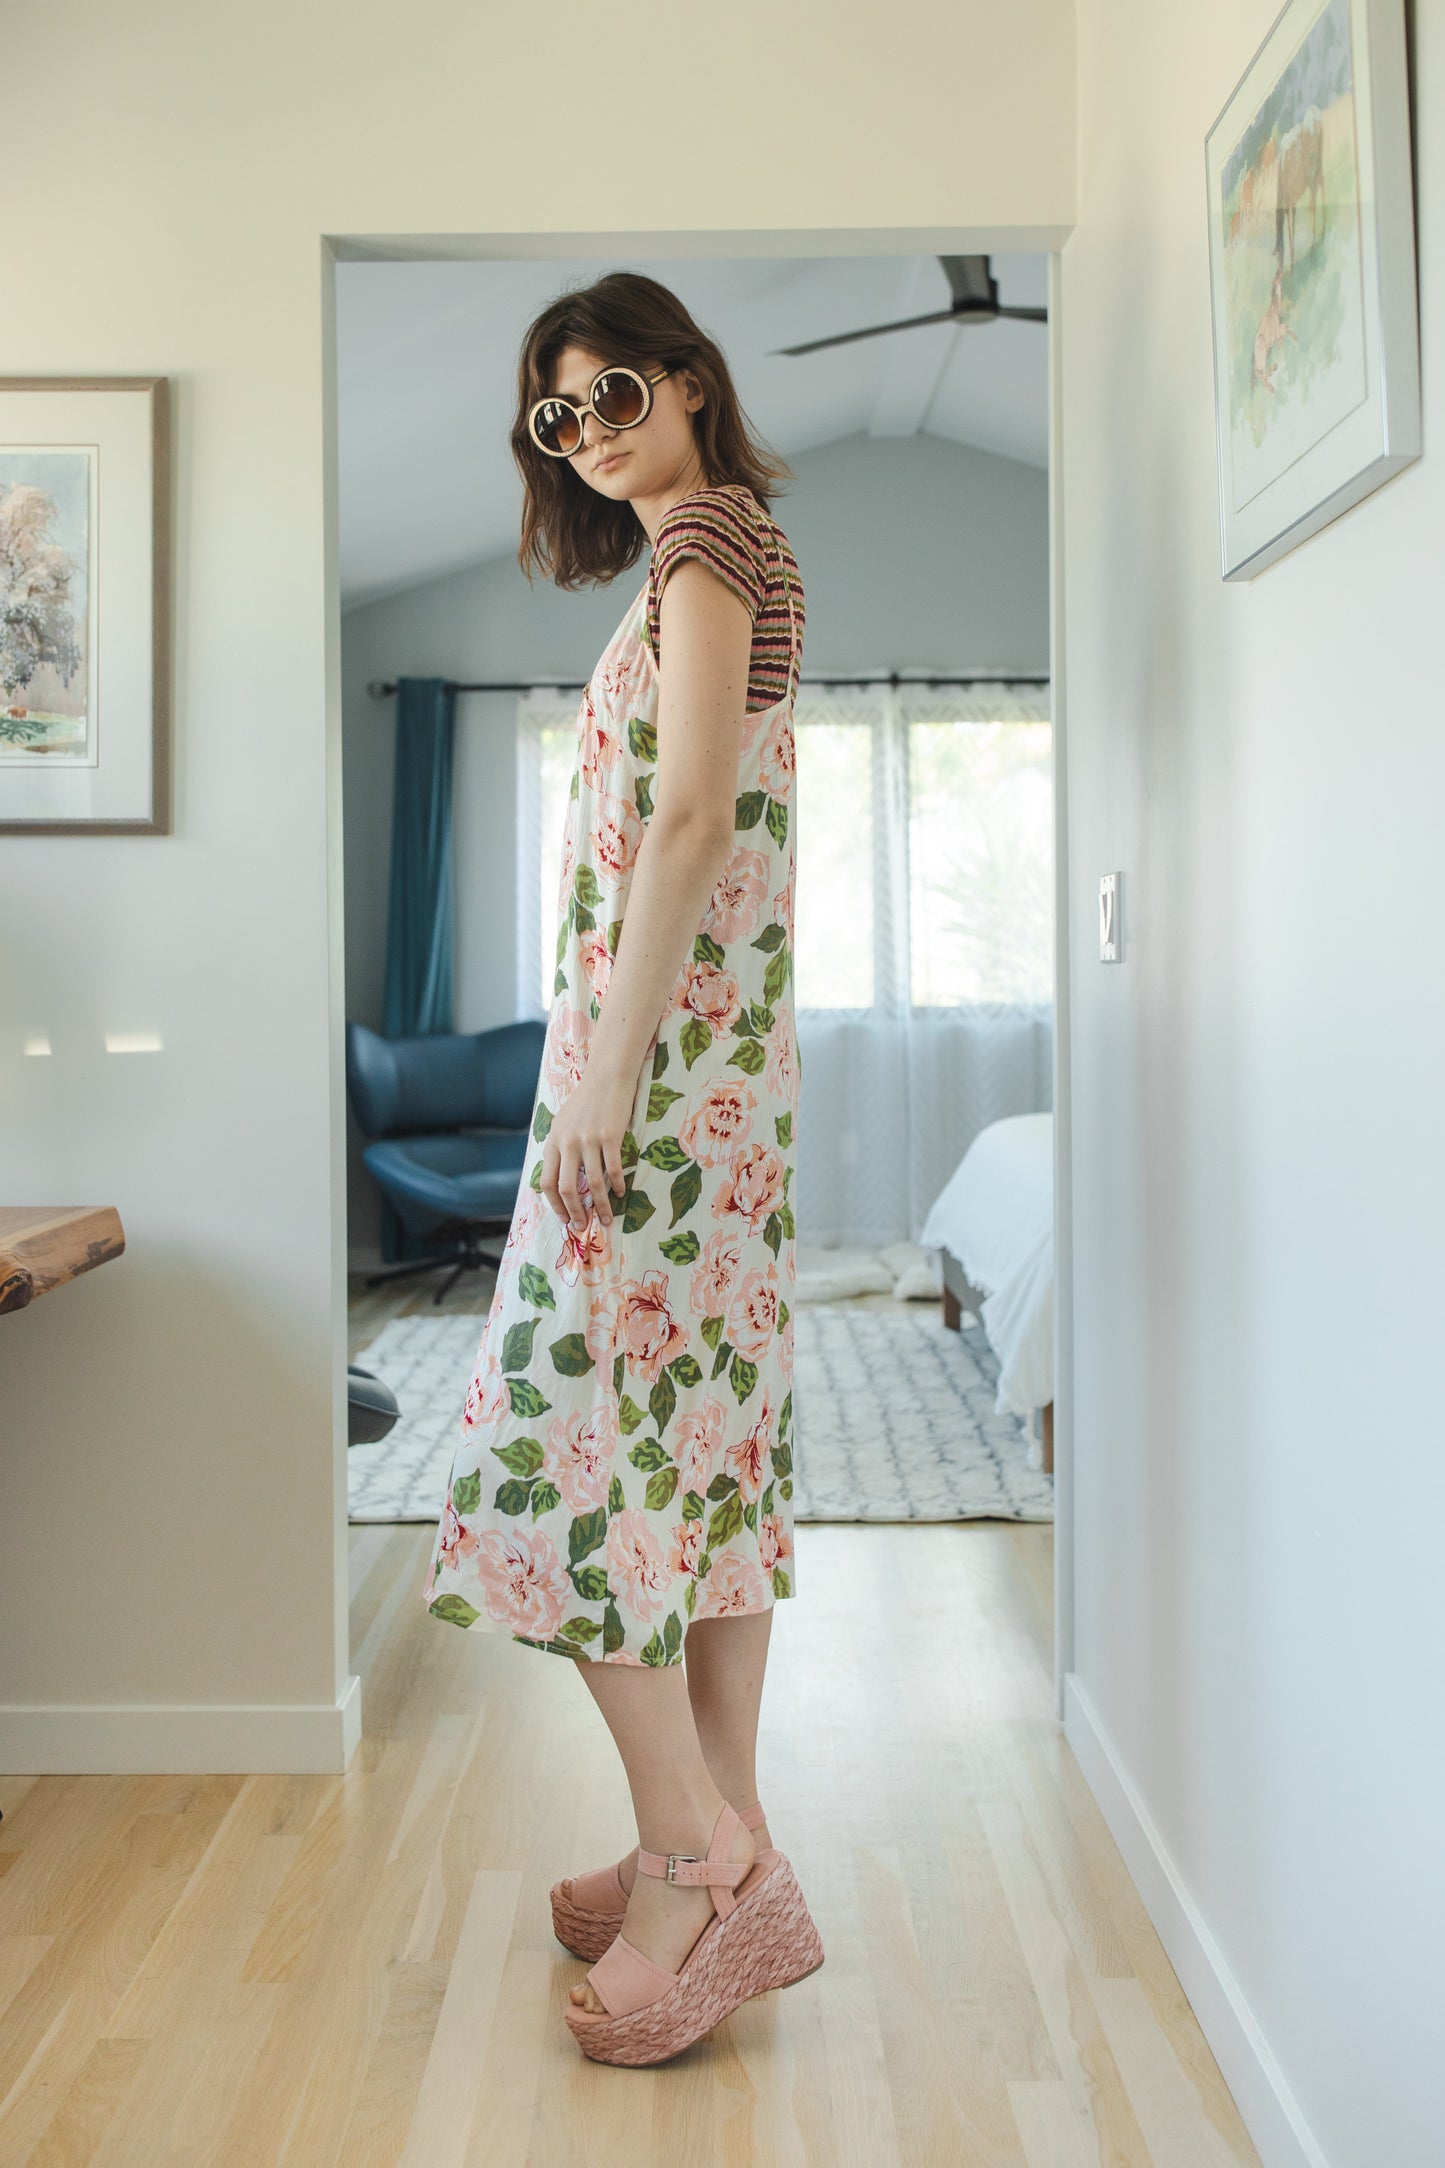 Midi slip dress with an ivory base color, adorned with floral rose print pattern featuring shades of green and pink. It features slender straps with a straight silhouette and relaxed fix, allowing for a beautiful drape and flowy movement. It's designed for a light, airy feel, suitable for warm weather or layered for cooler days.